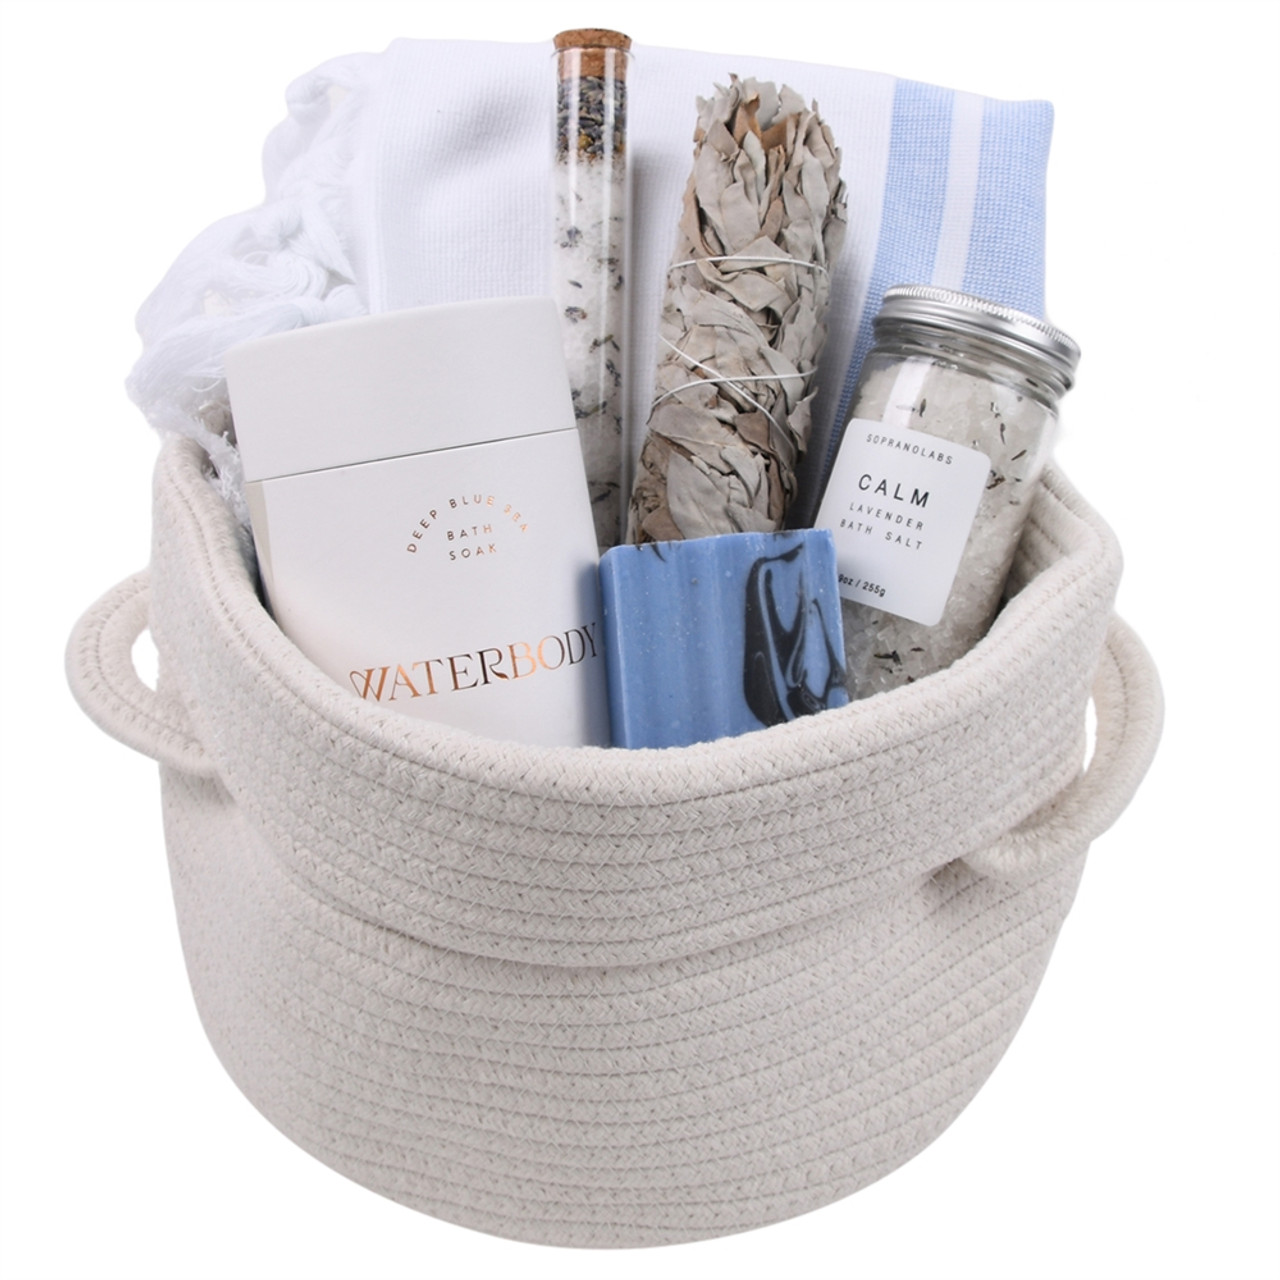 Spa Gift Basket - All Natural, Relax and Renew - Gifts to Help Relaxation and Pamper - Her, She, Mom, Friend - Baskets Filled with Self Care Items for